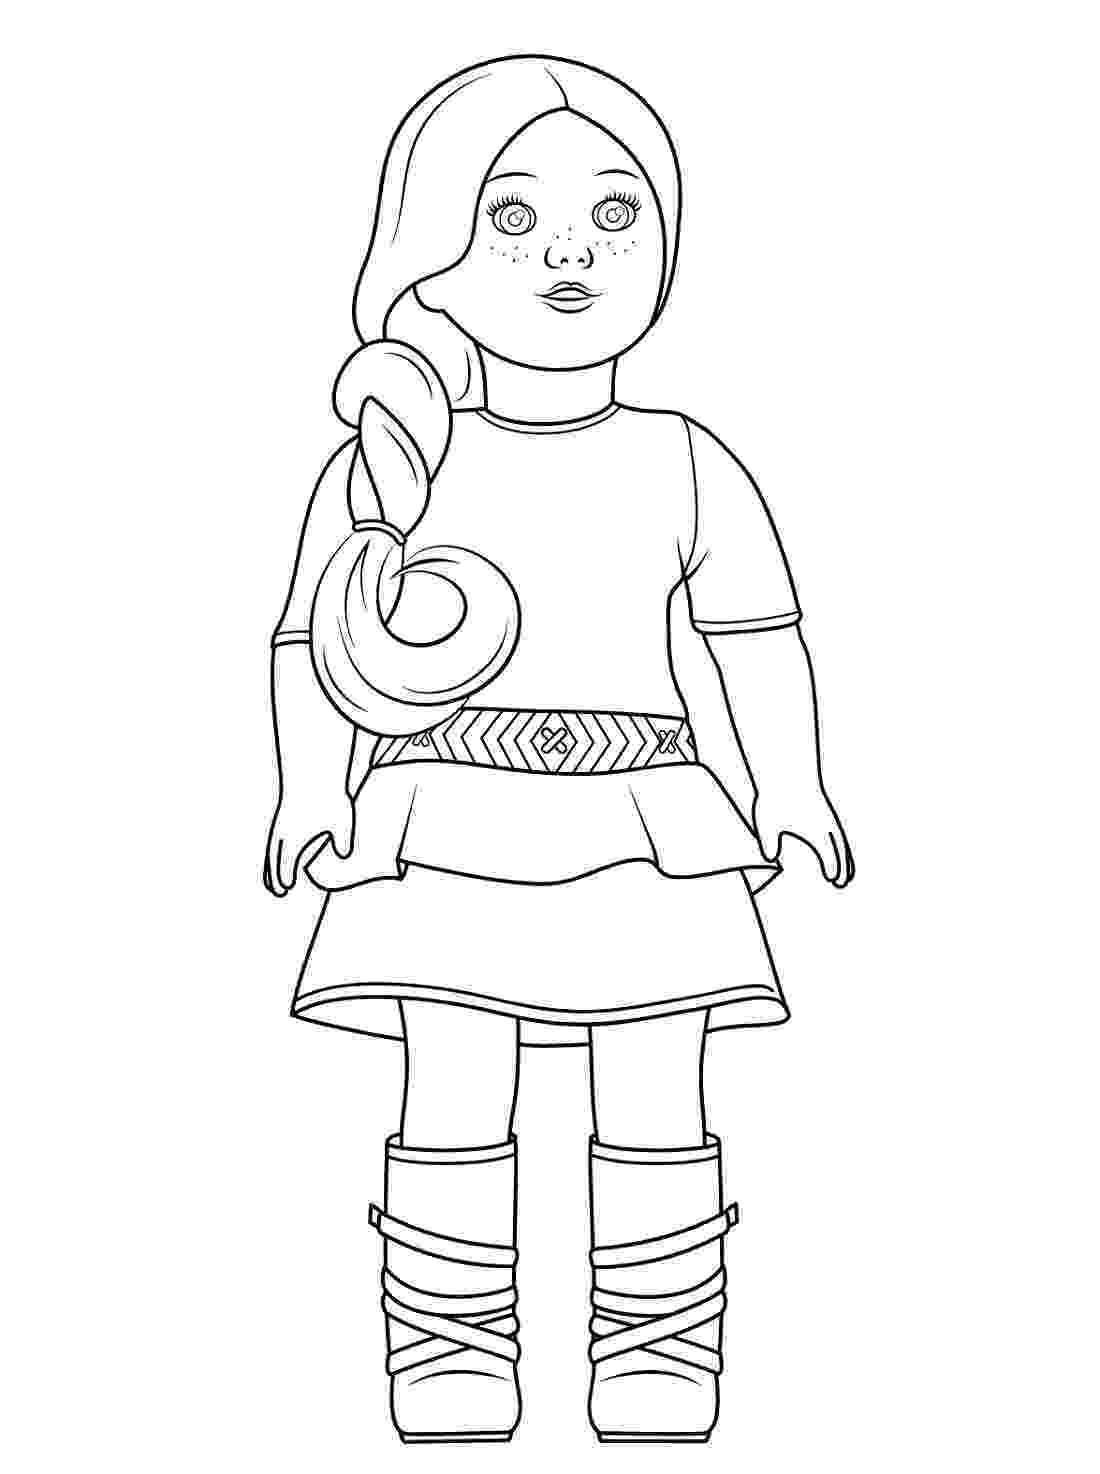 american girl coloring pages free get this free american girl coloring pages t29m17 free american coloring girl pages 